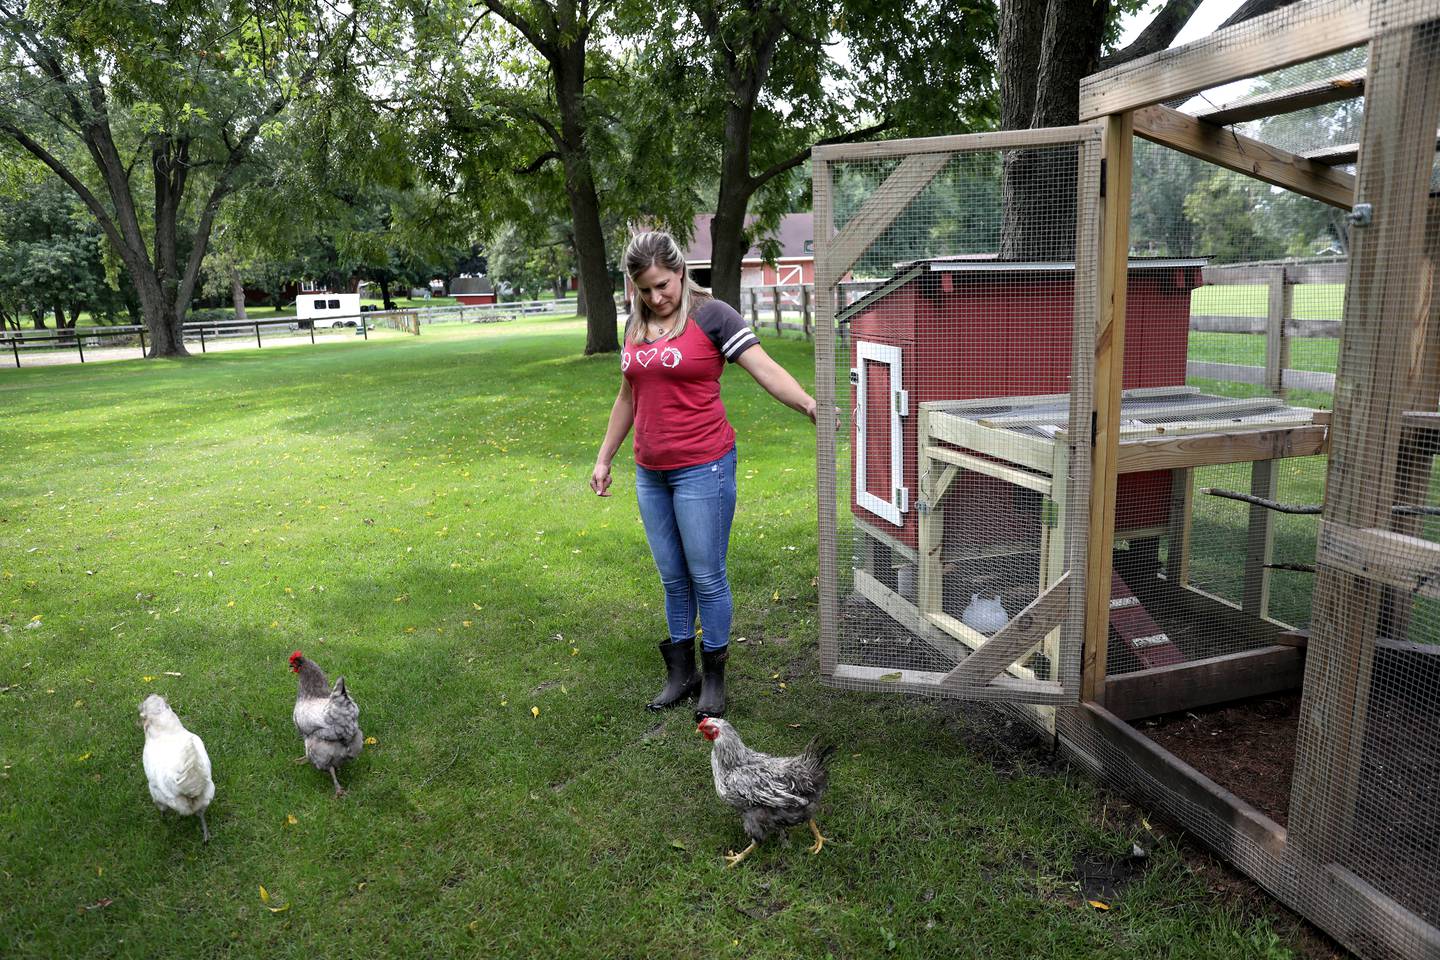 Campton Hills resident Julie Domaracki owns two horses and five chickens. She is concerned that the village's rezoning efforts will restrict horses by requiring special use permits and require licenses for chickens.